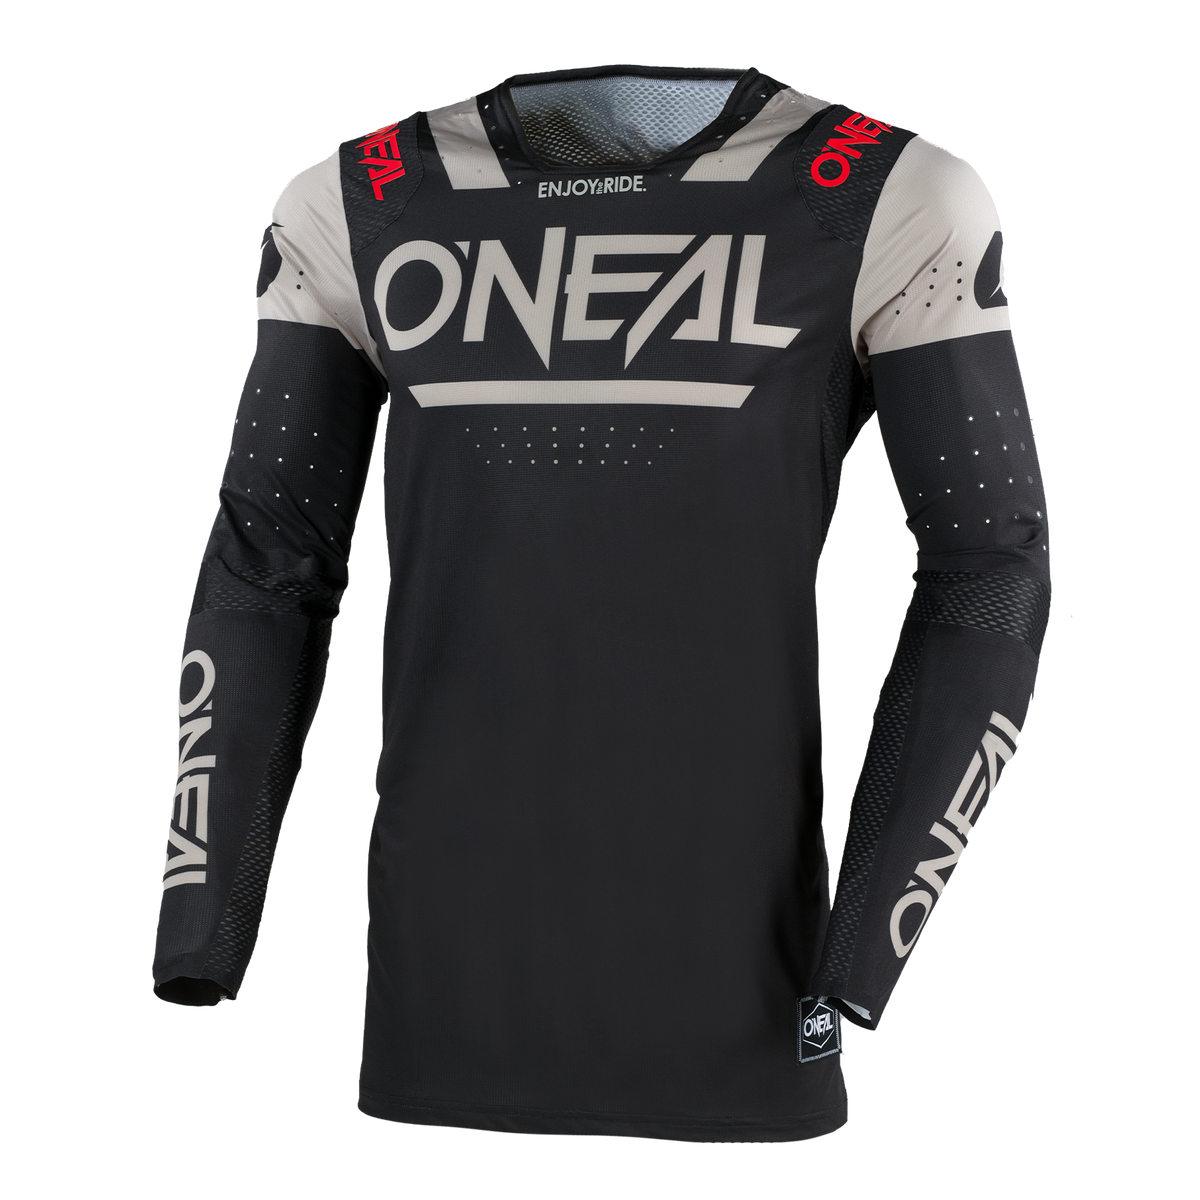 https://cdn.oneal.eu/assets/_default_upload_bucket/2025_ONeal_PRODIGY%20Jersey%20FIVE%20FOUR%20V.25_black_gray_front_2.png